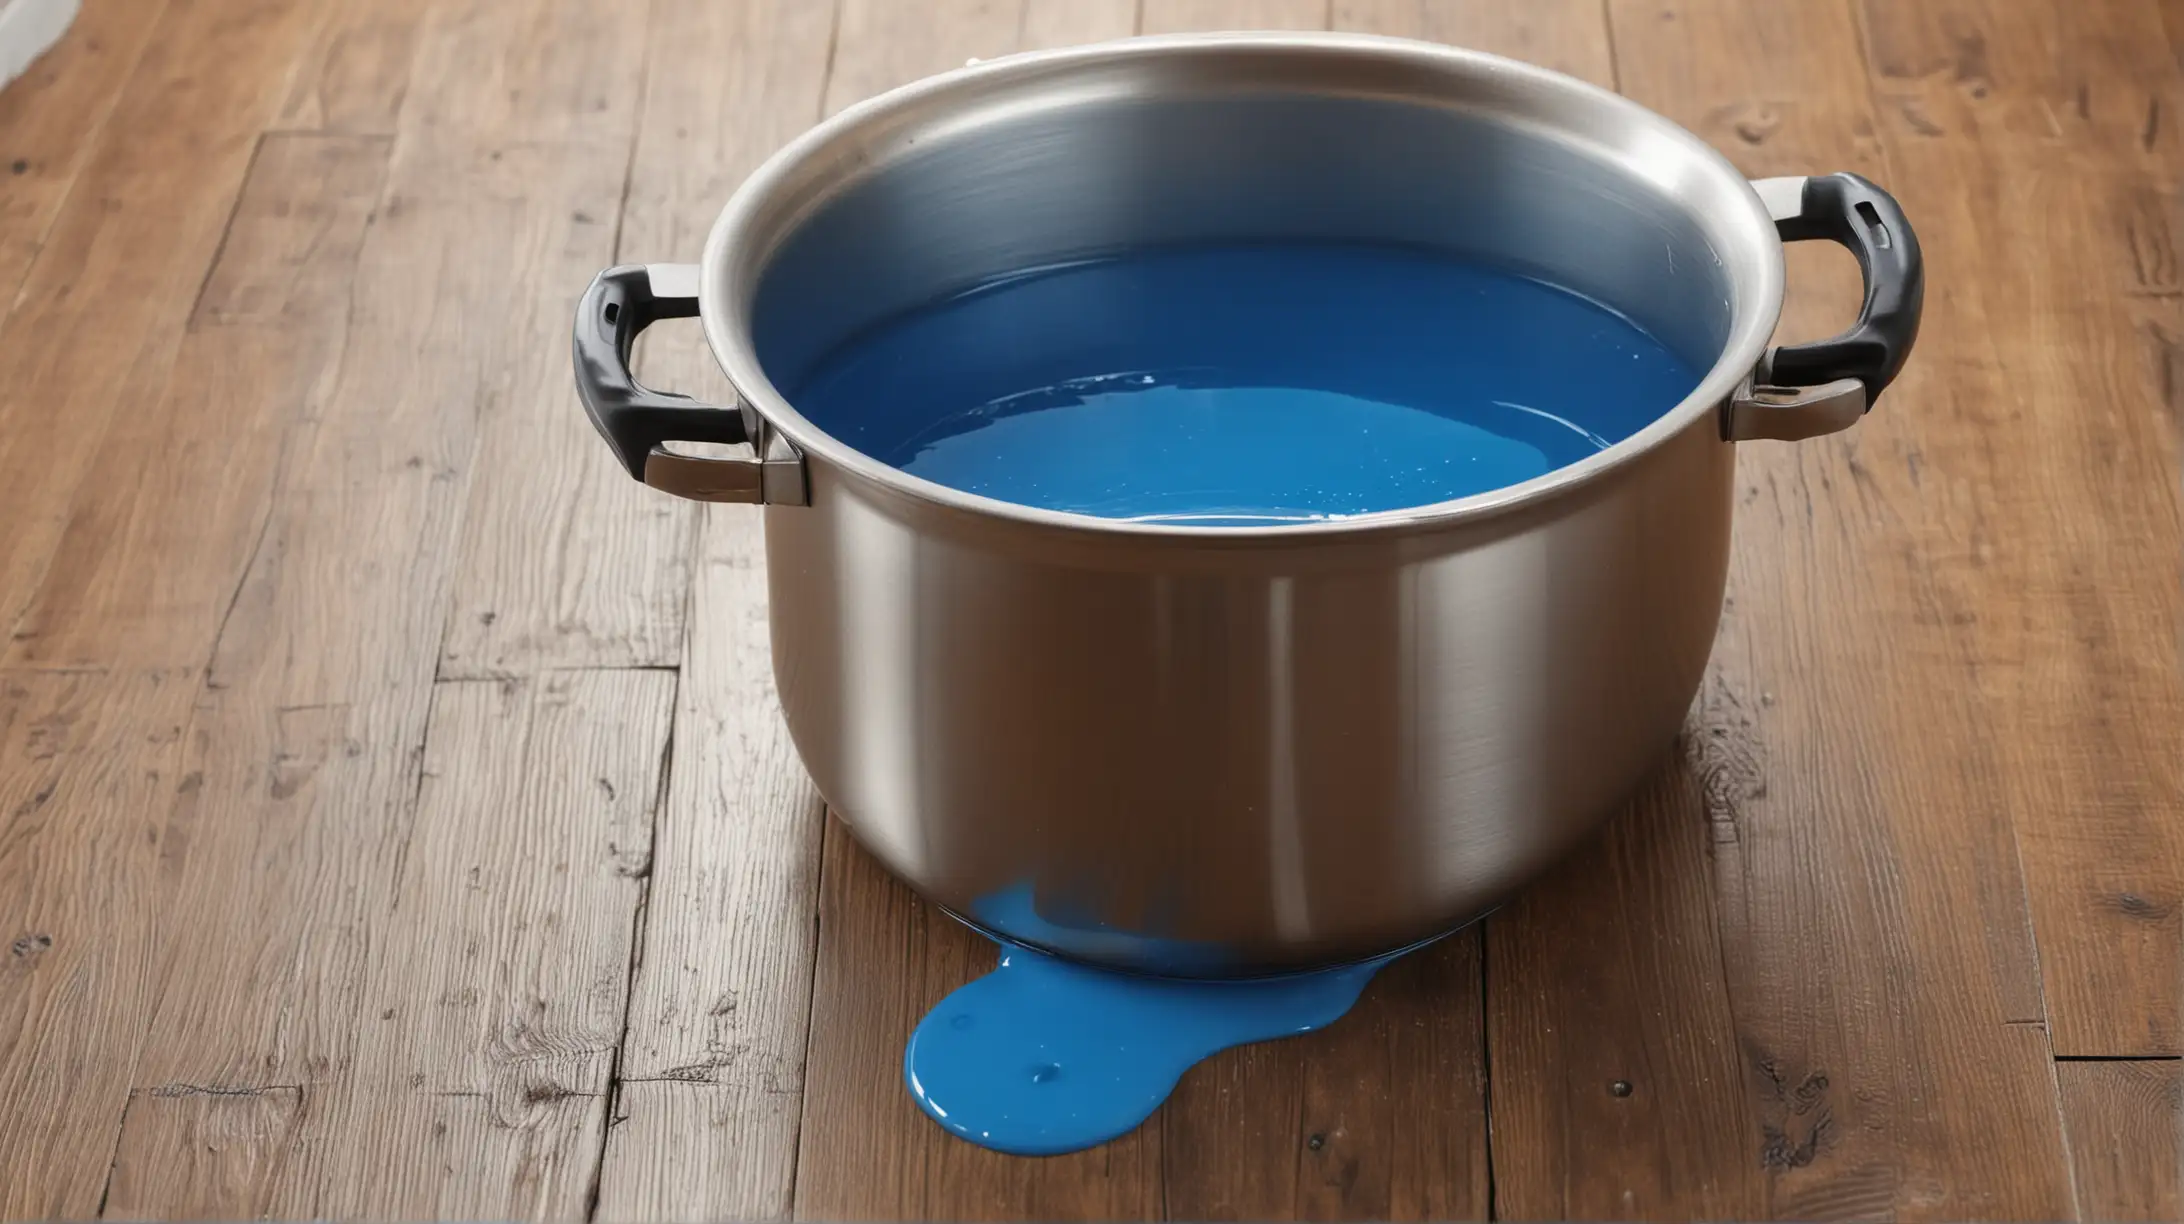 Shimmering Blue Potion in a Boiling Pot on Natural Wood Surface